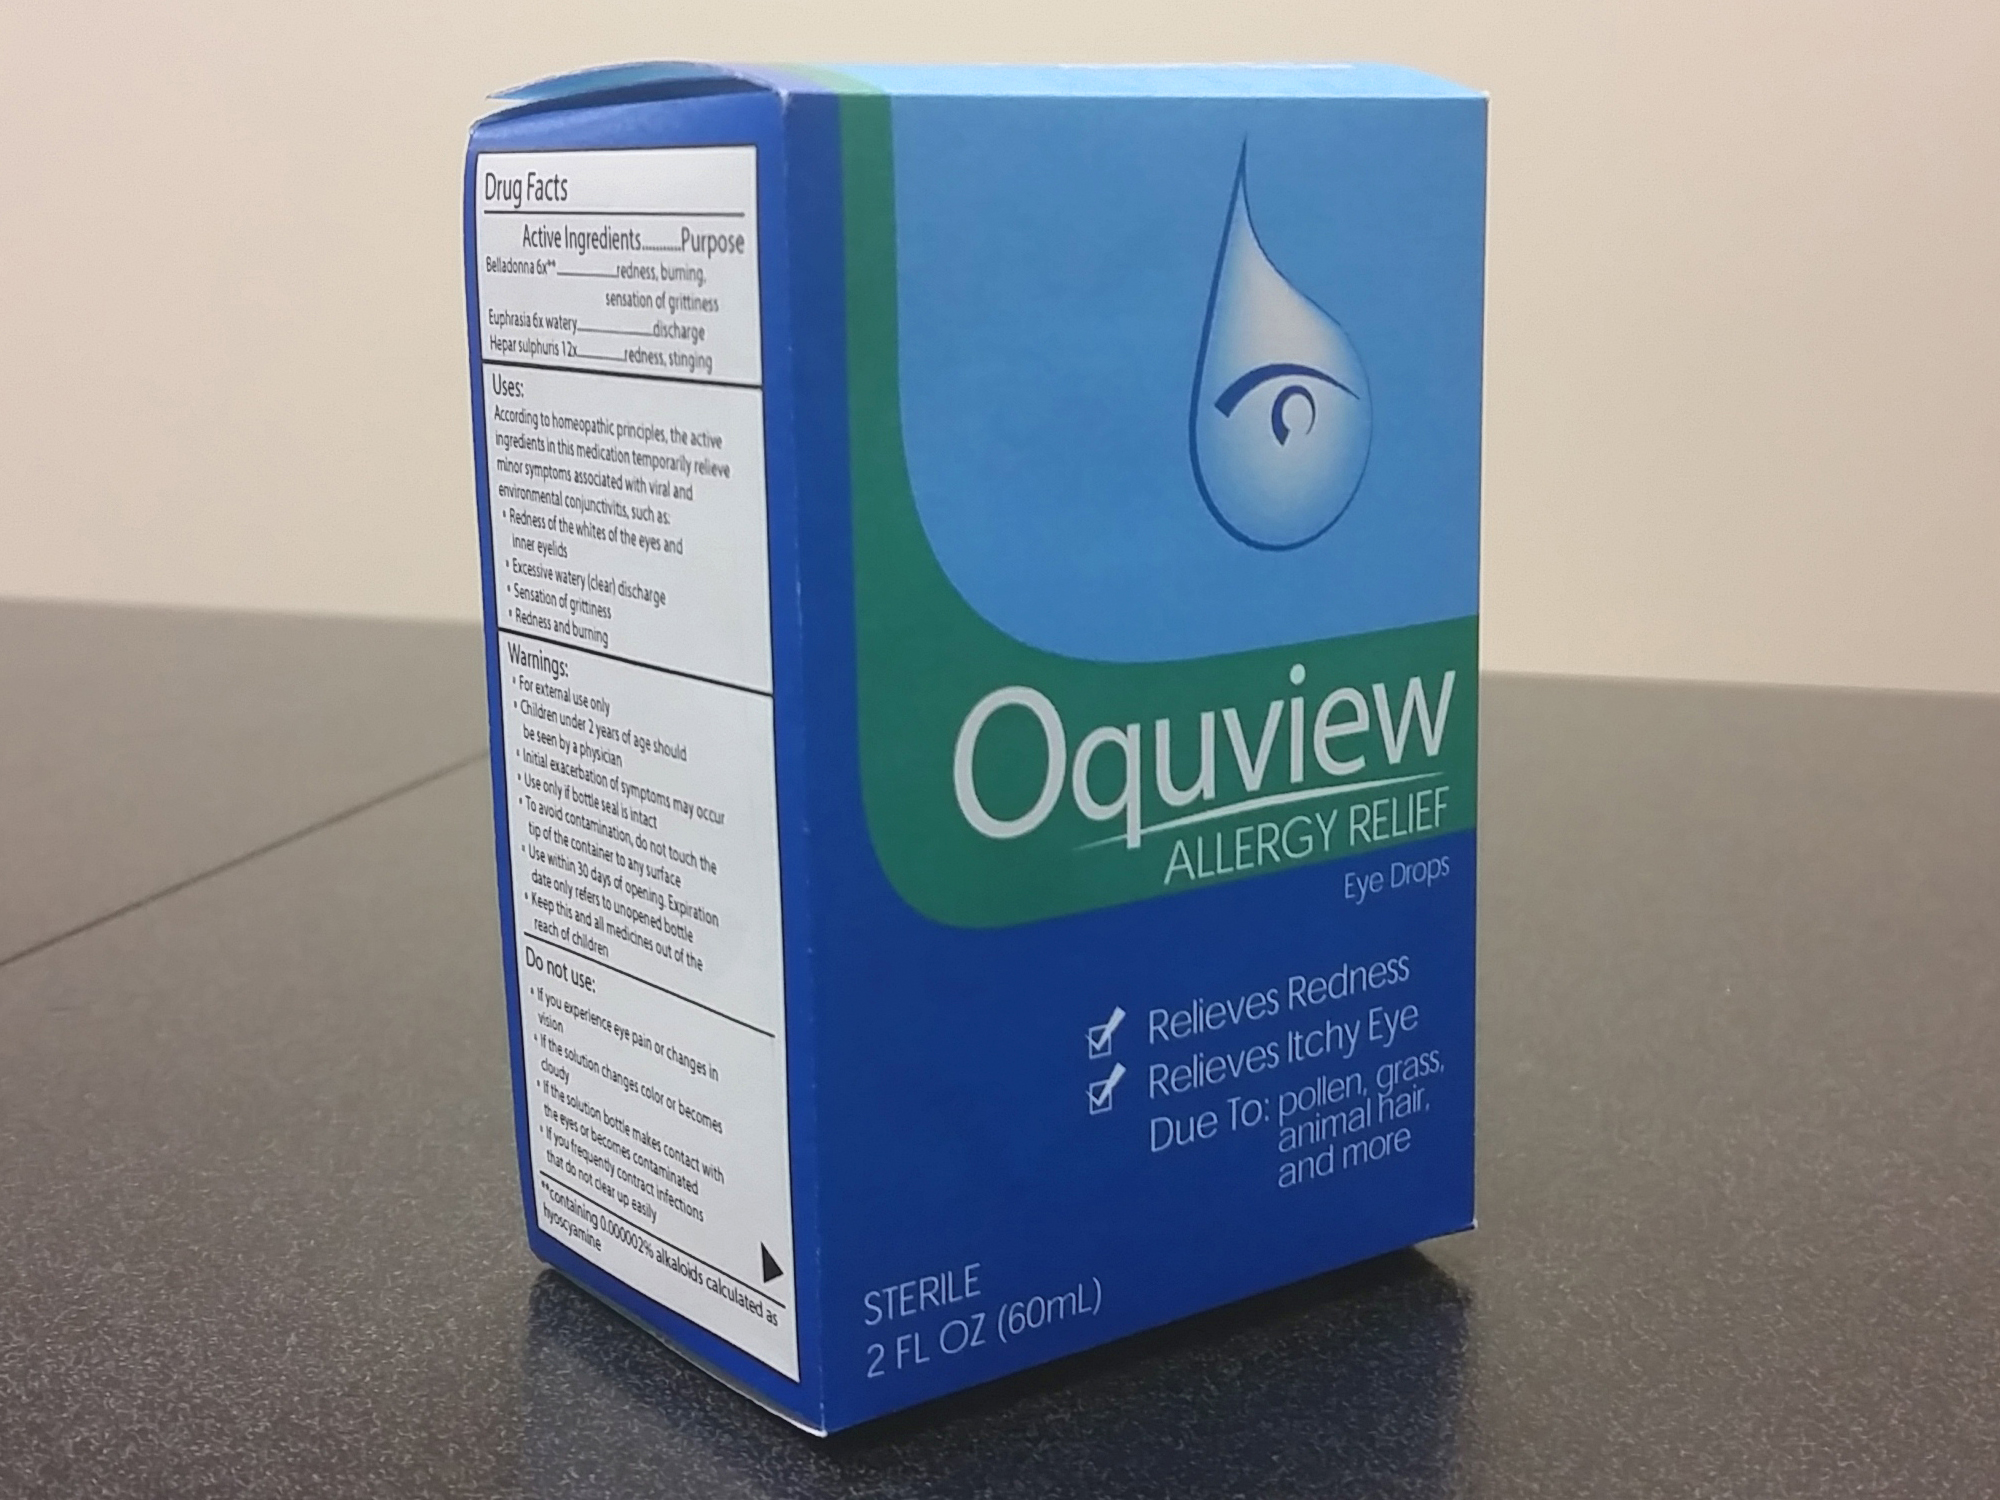 Oquview box, side view